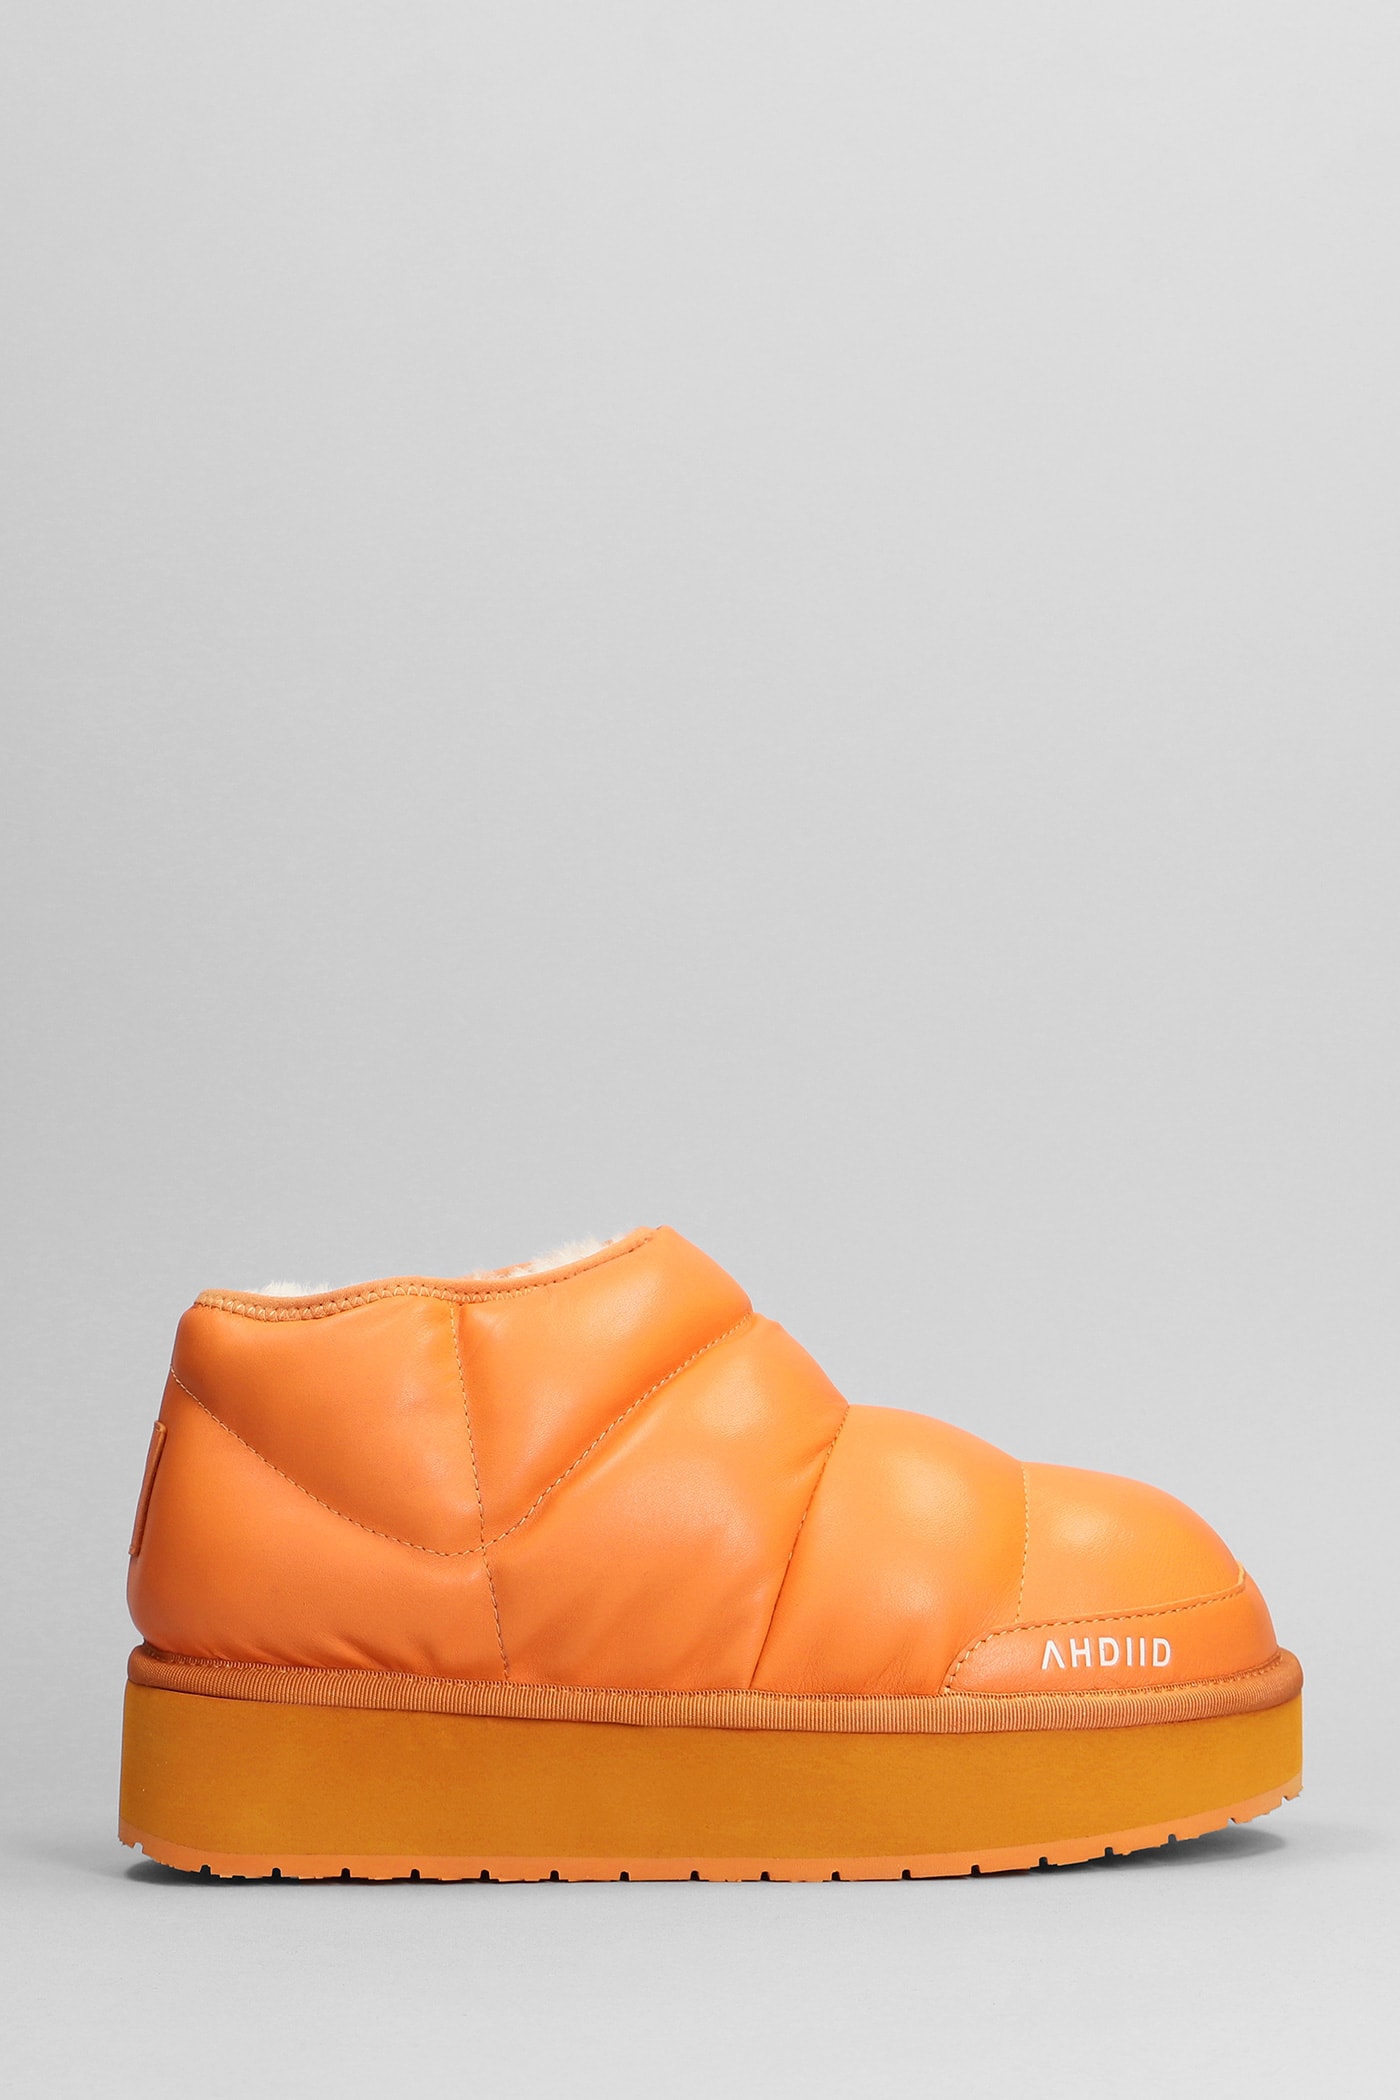 Ahdiid Los Angeles Low Heels Ankle Boots In Orange Leather